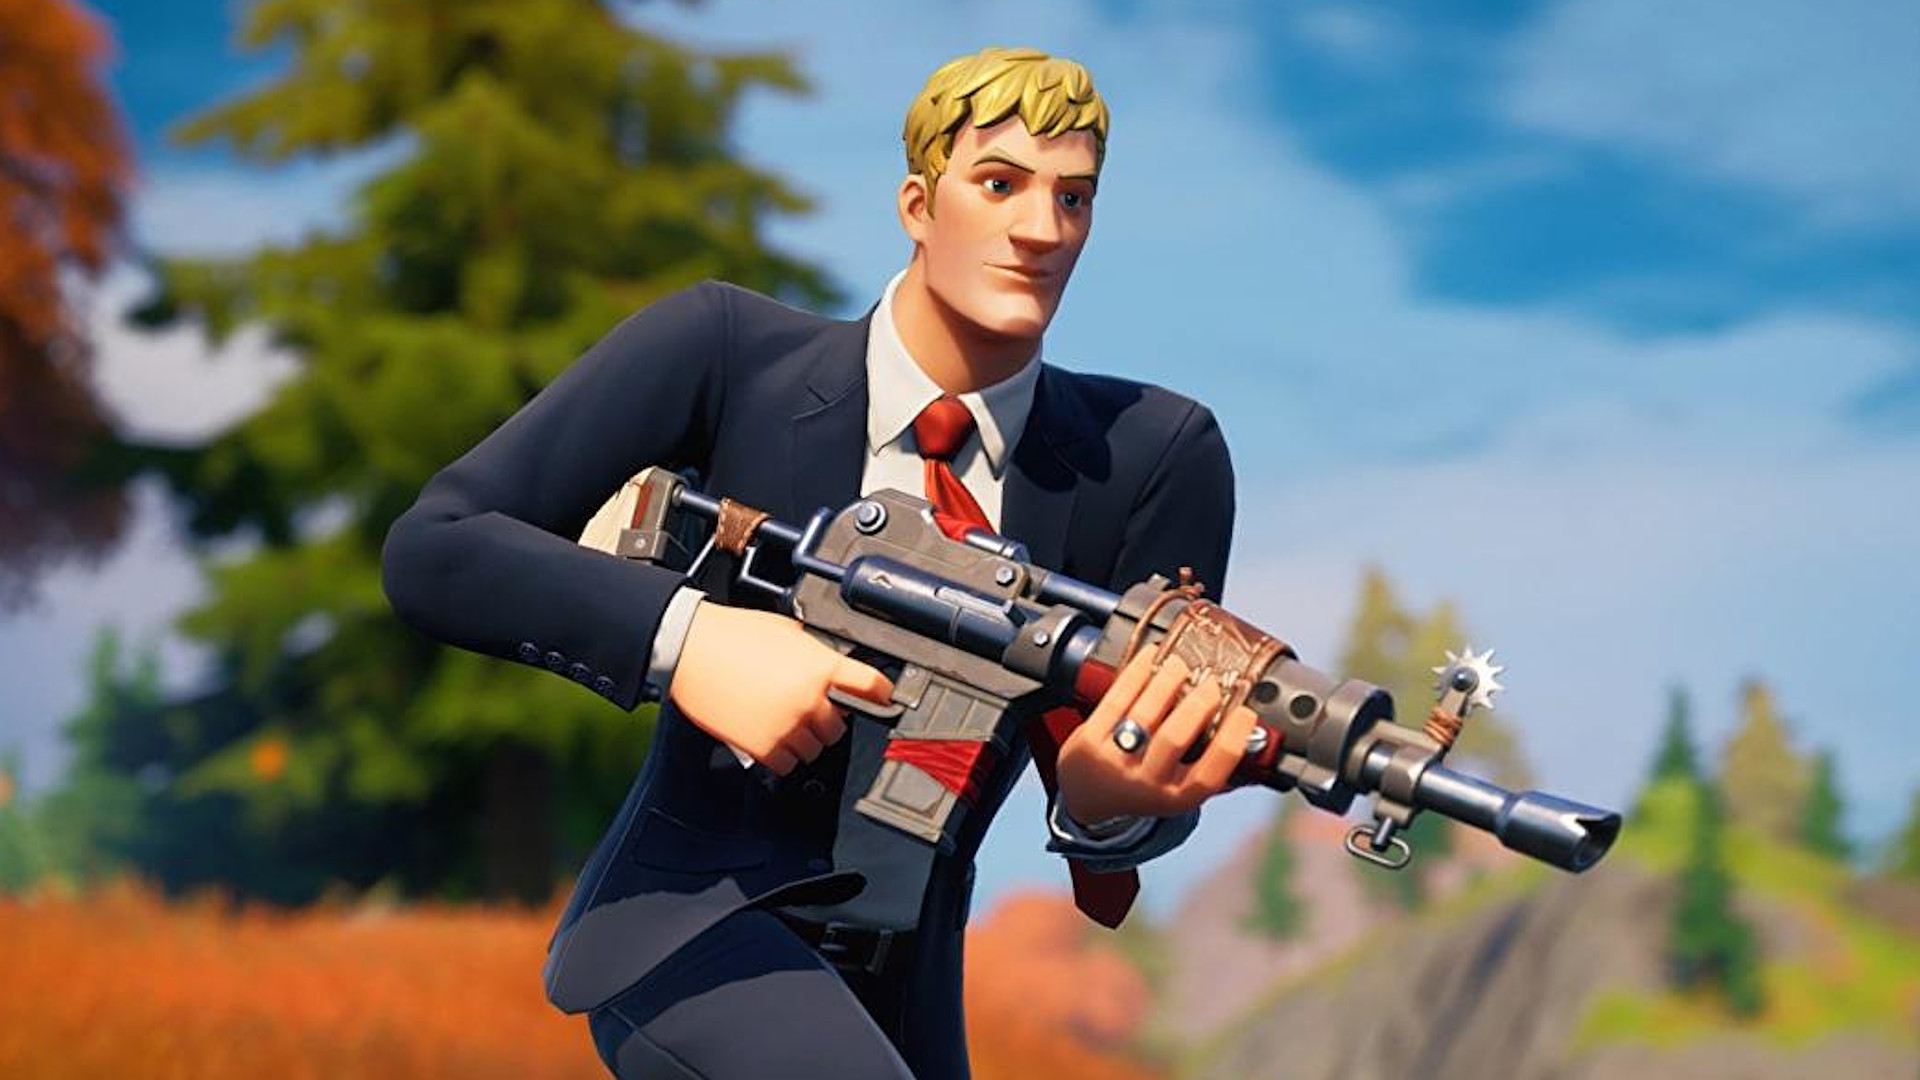 Fortnite: How To Get Boom's Sniper Rifle Within Season 5